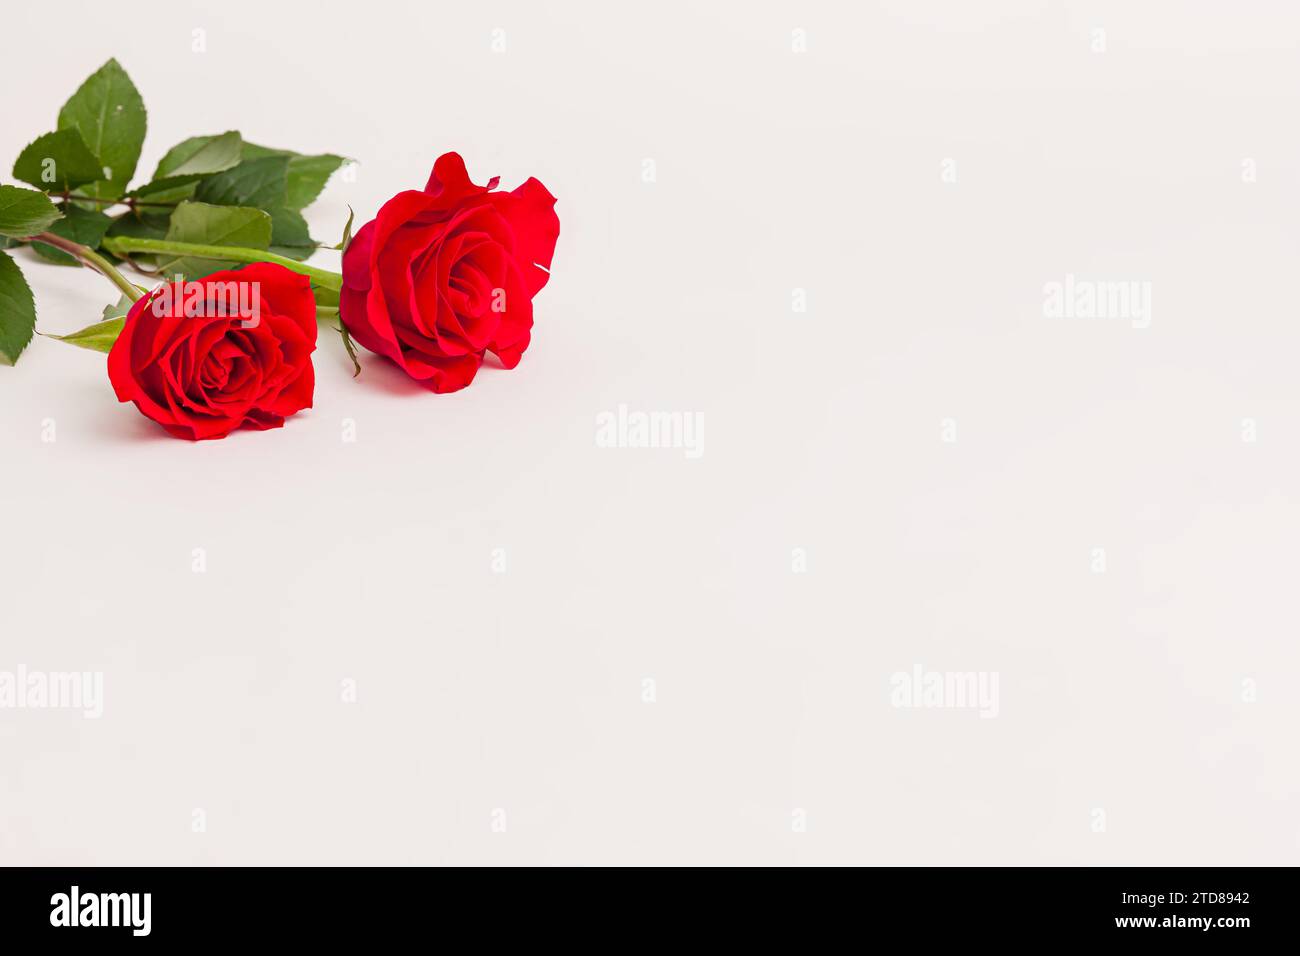 Blooming pink red rose flower isolated on white background Stock Photo